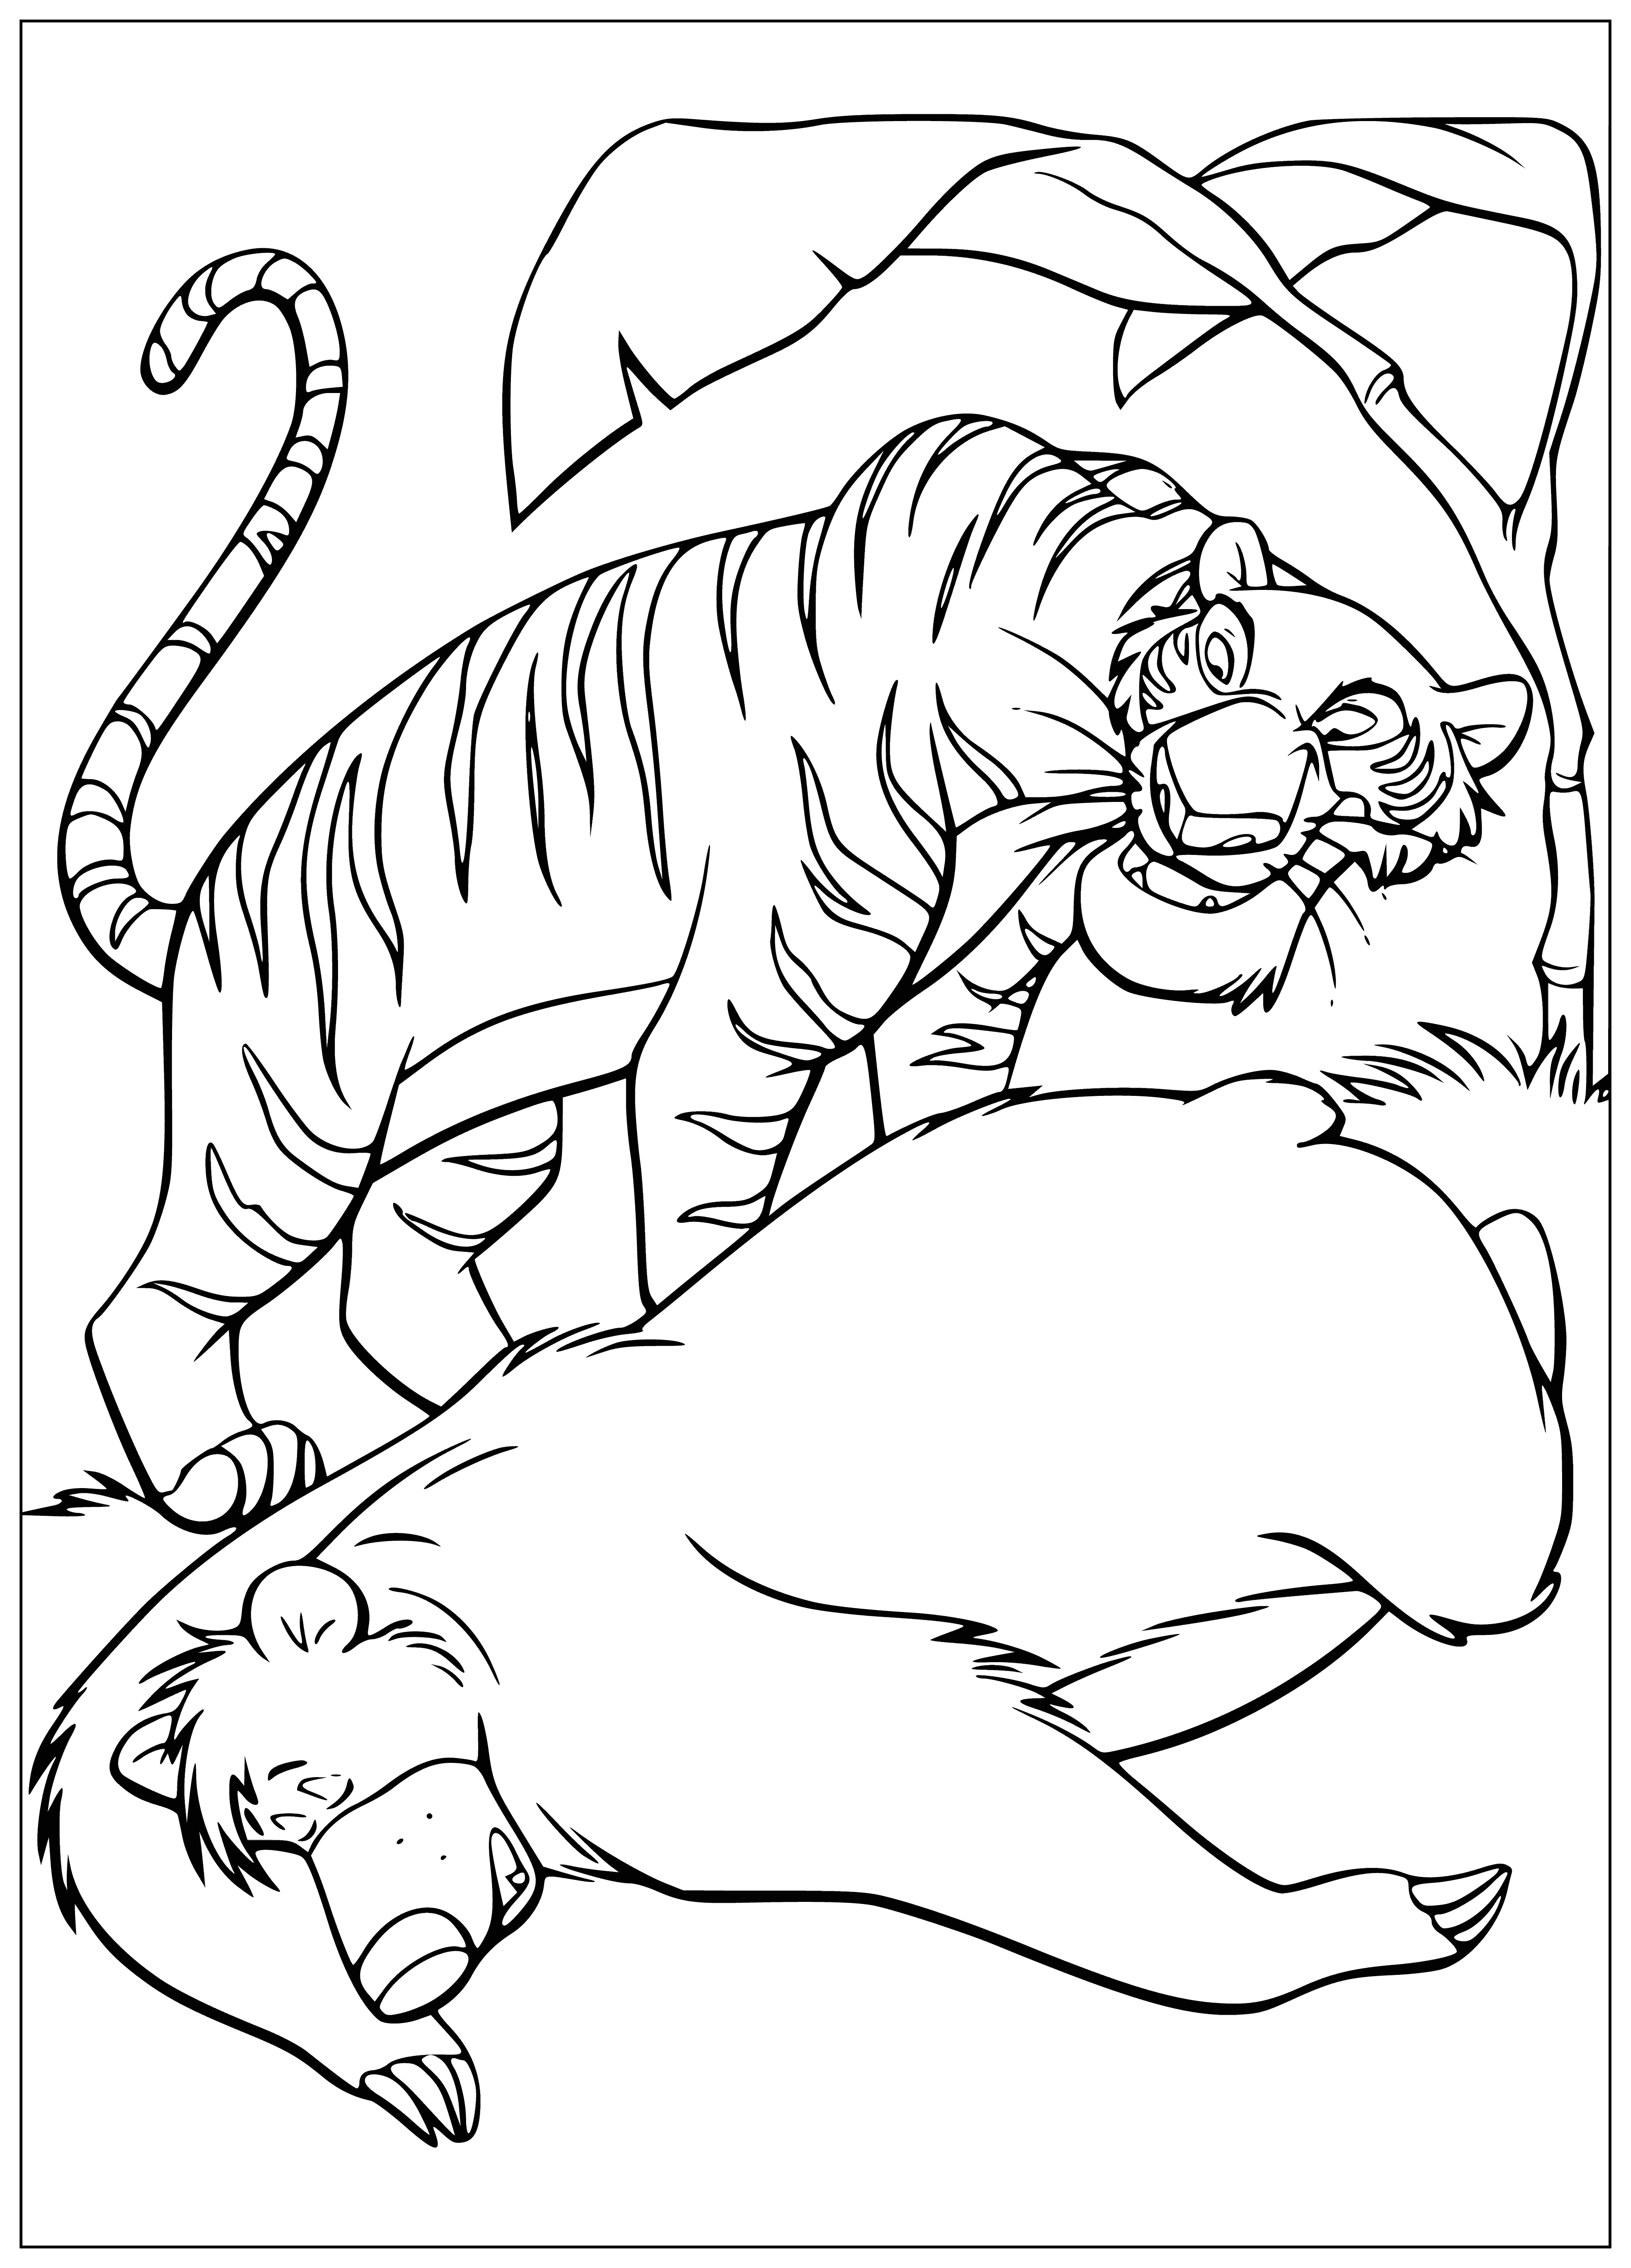 coloring page: Shere Khan is menacing; Baloo is friendly. He's smiling and waving.